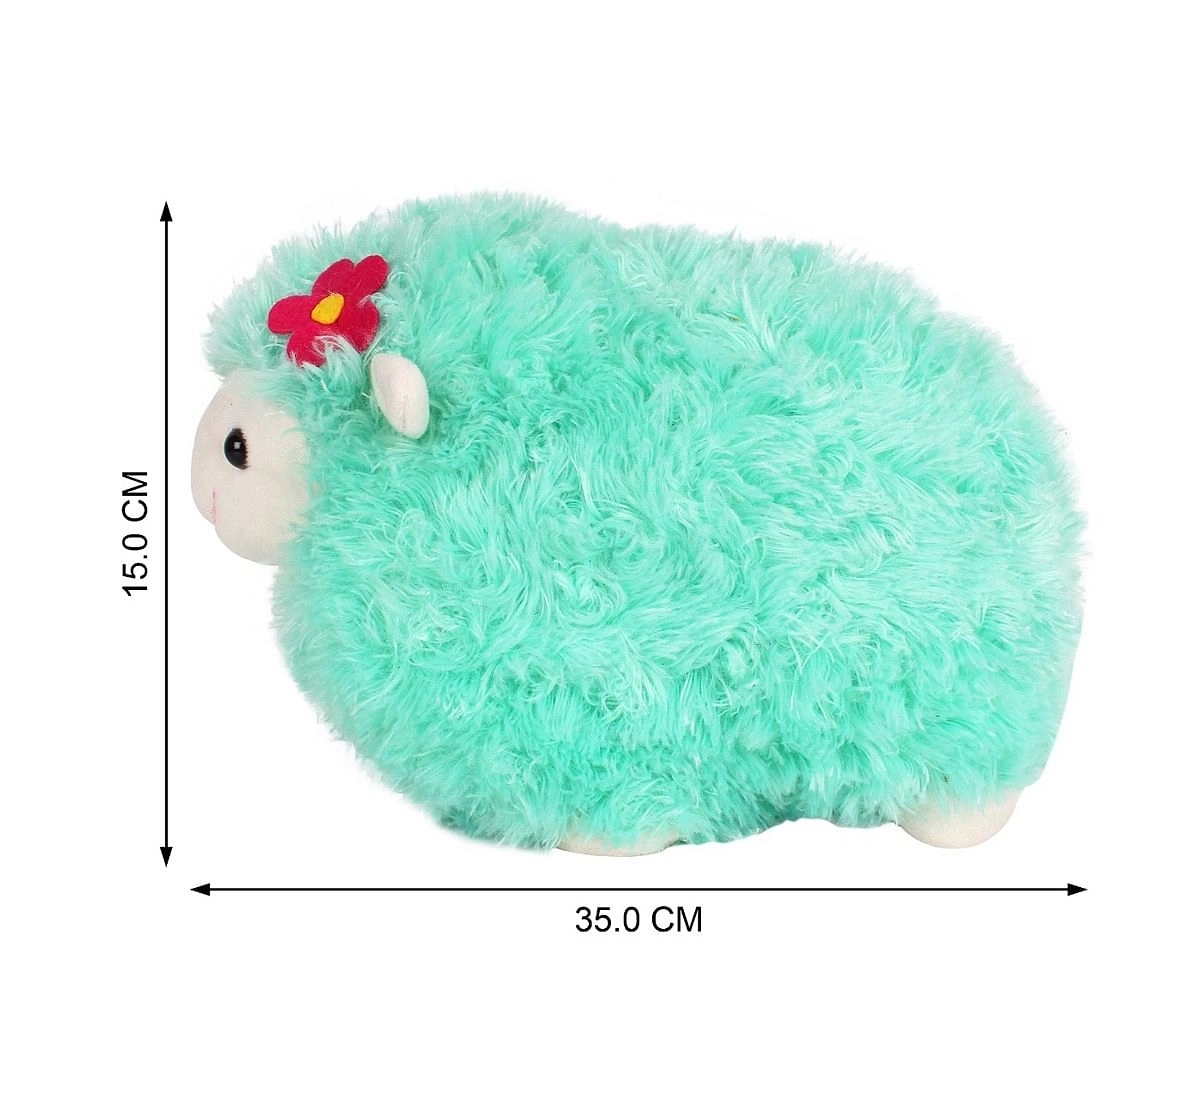 Fuzzbuzz Green Lamb Stuffed Animal - 28Cm Quirky Soft Toys for Kids age 0M+ - 20 Cm (Green)